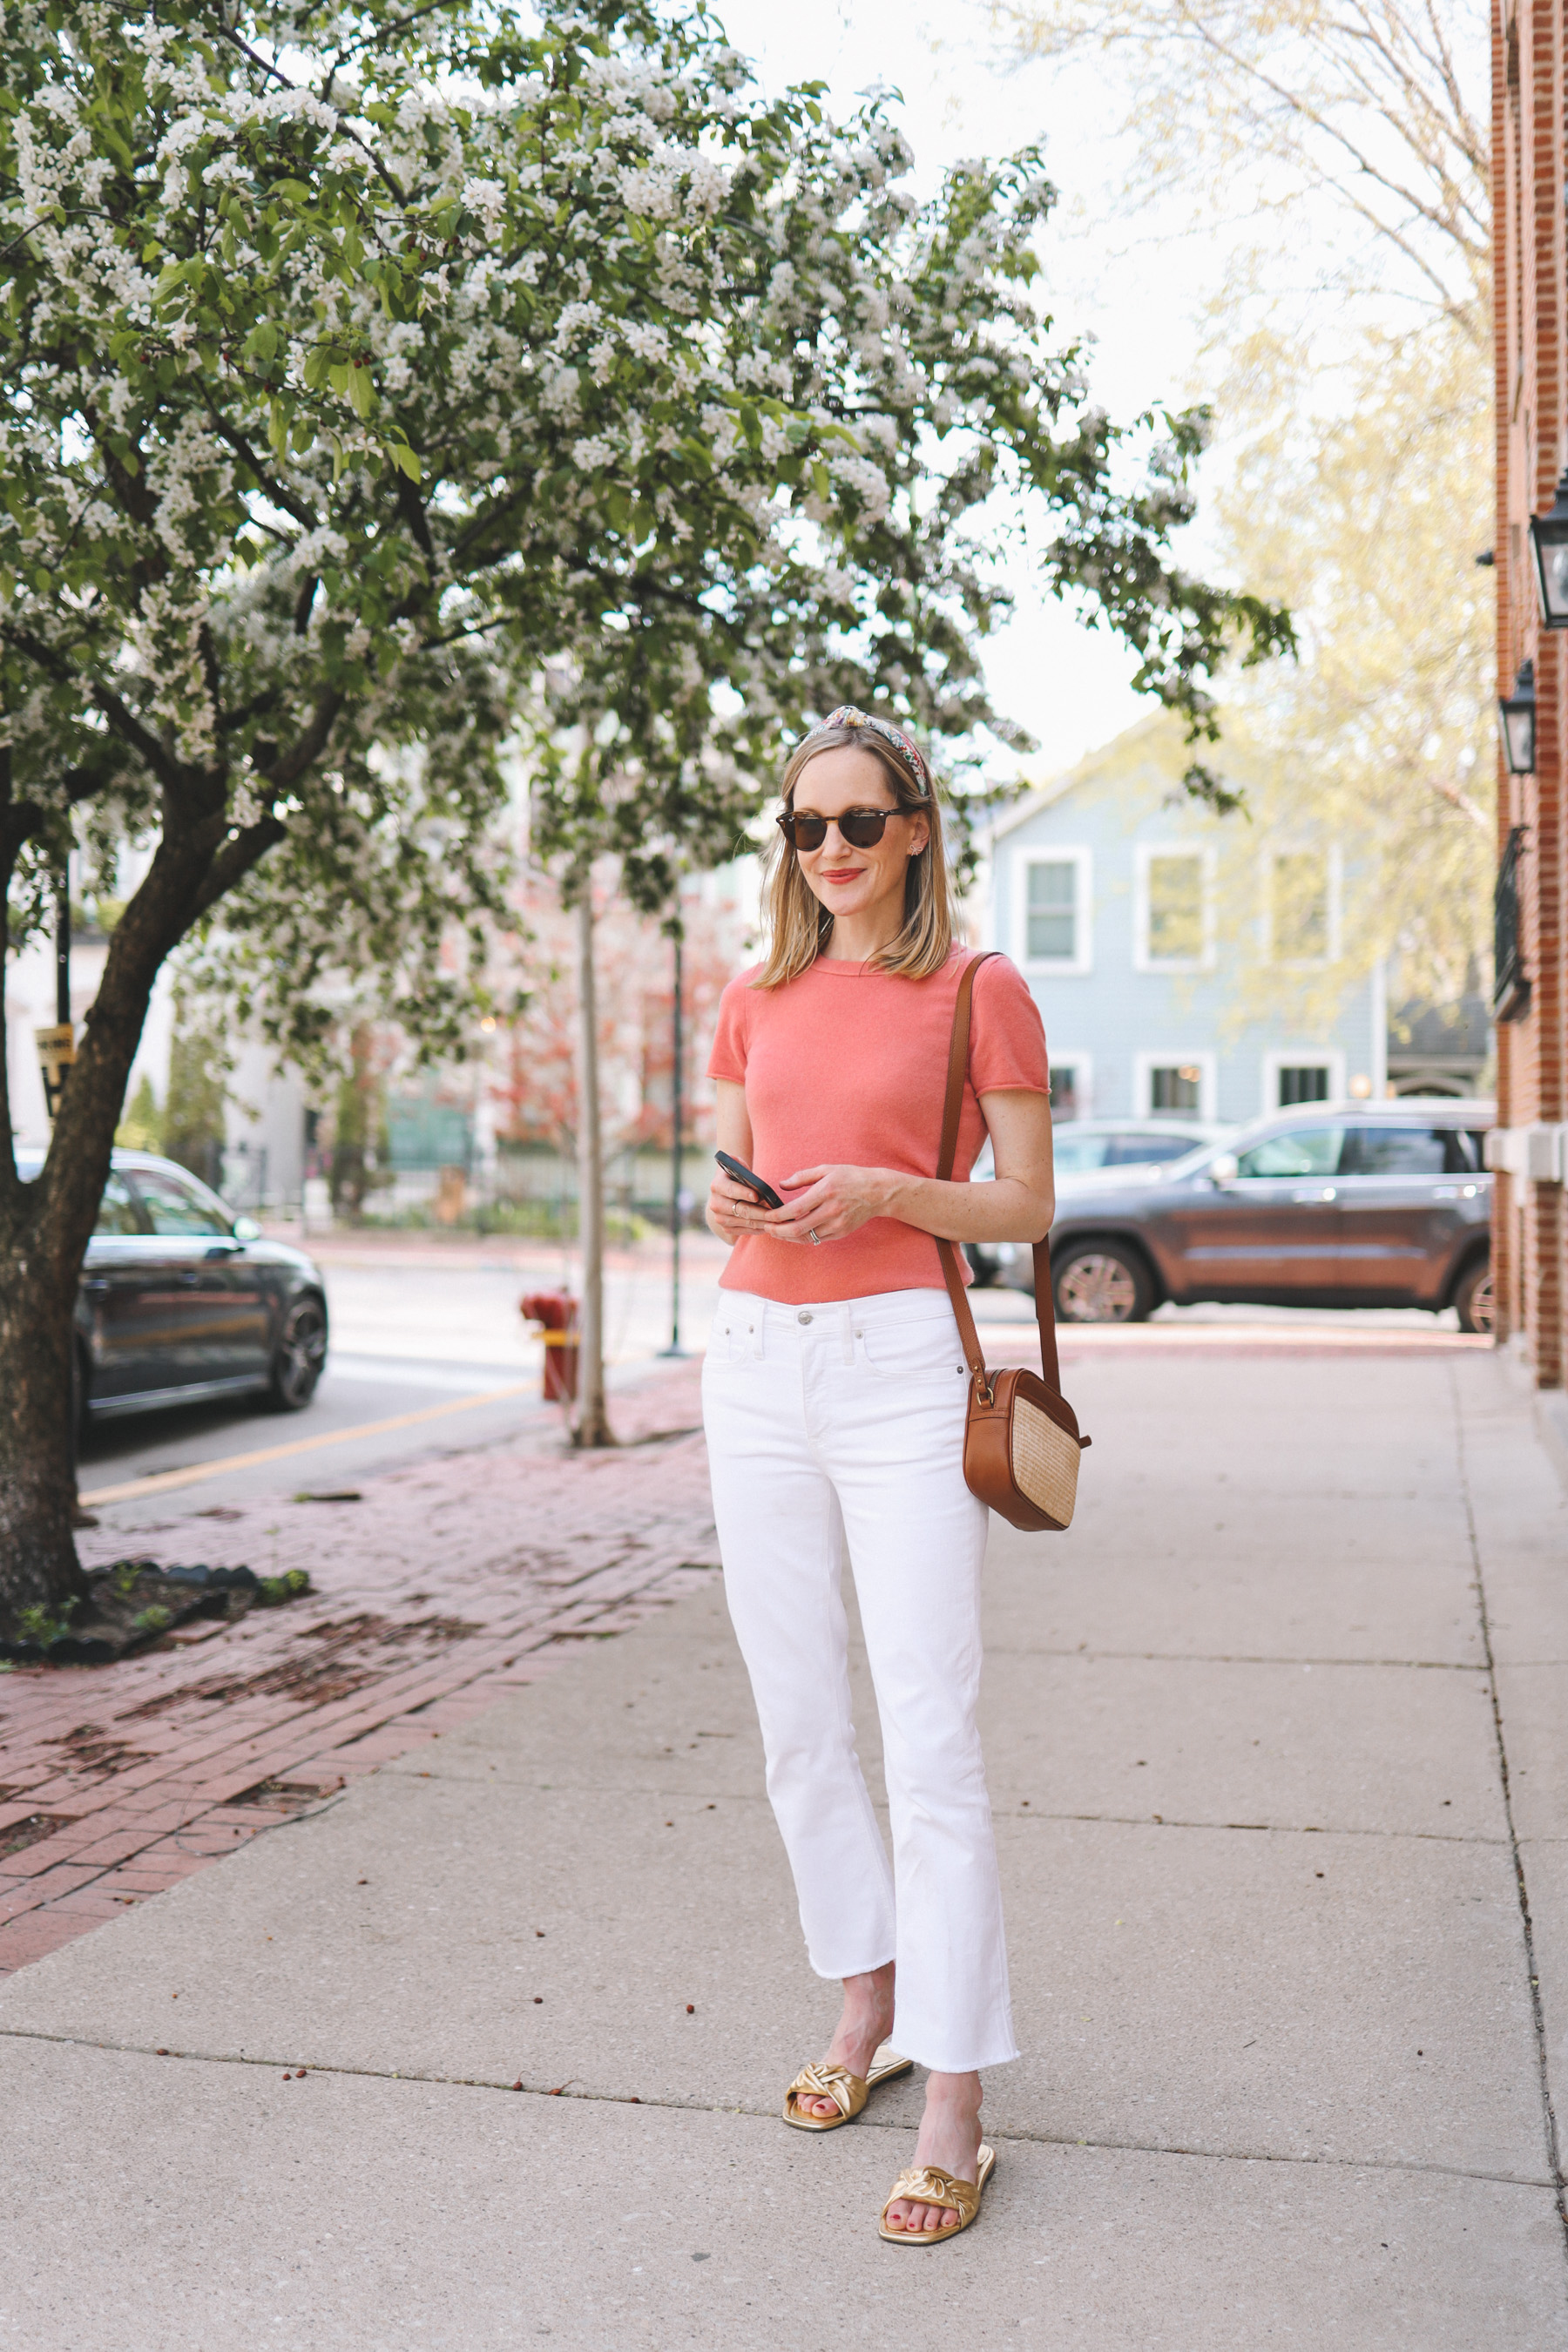 metallic sandals | New Spring Outfits from J.Crew